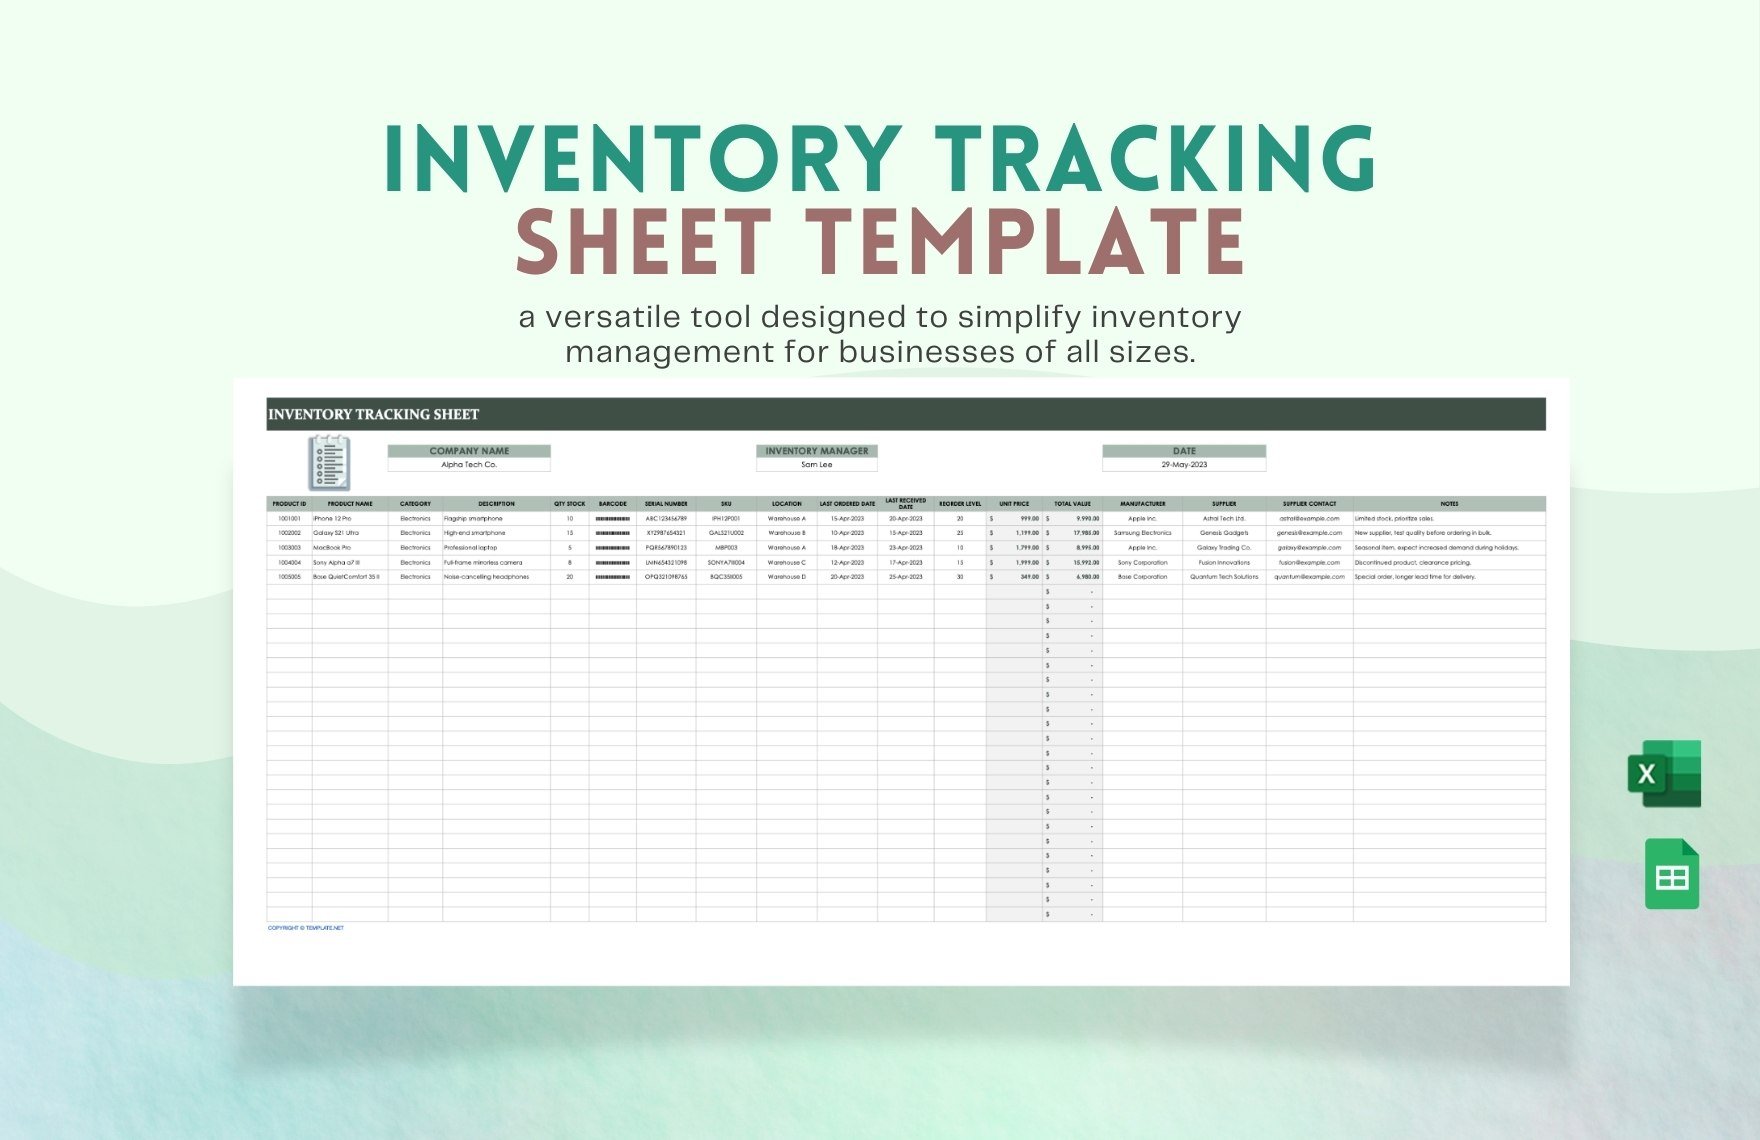 Inventory Tracking Sheet Template in Excel, Google Sheets